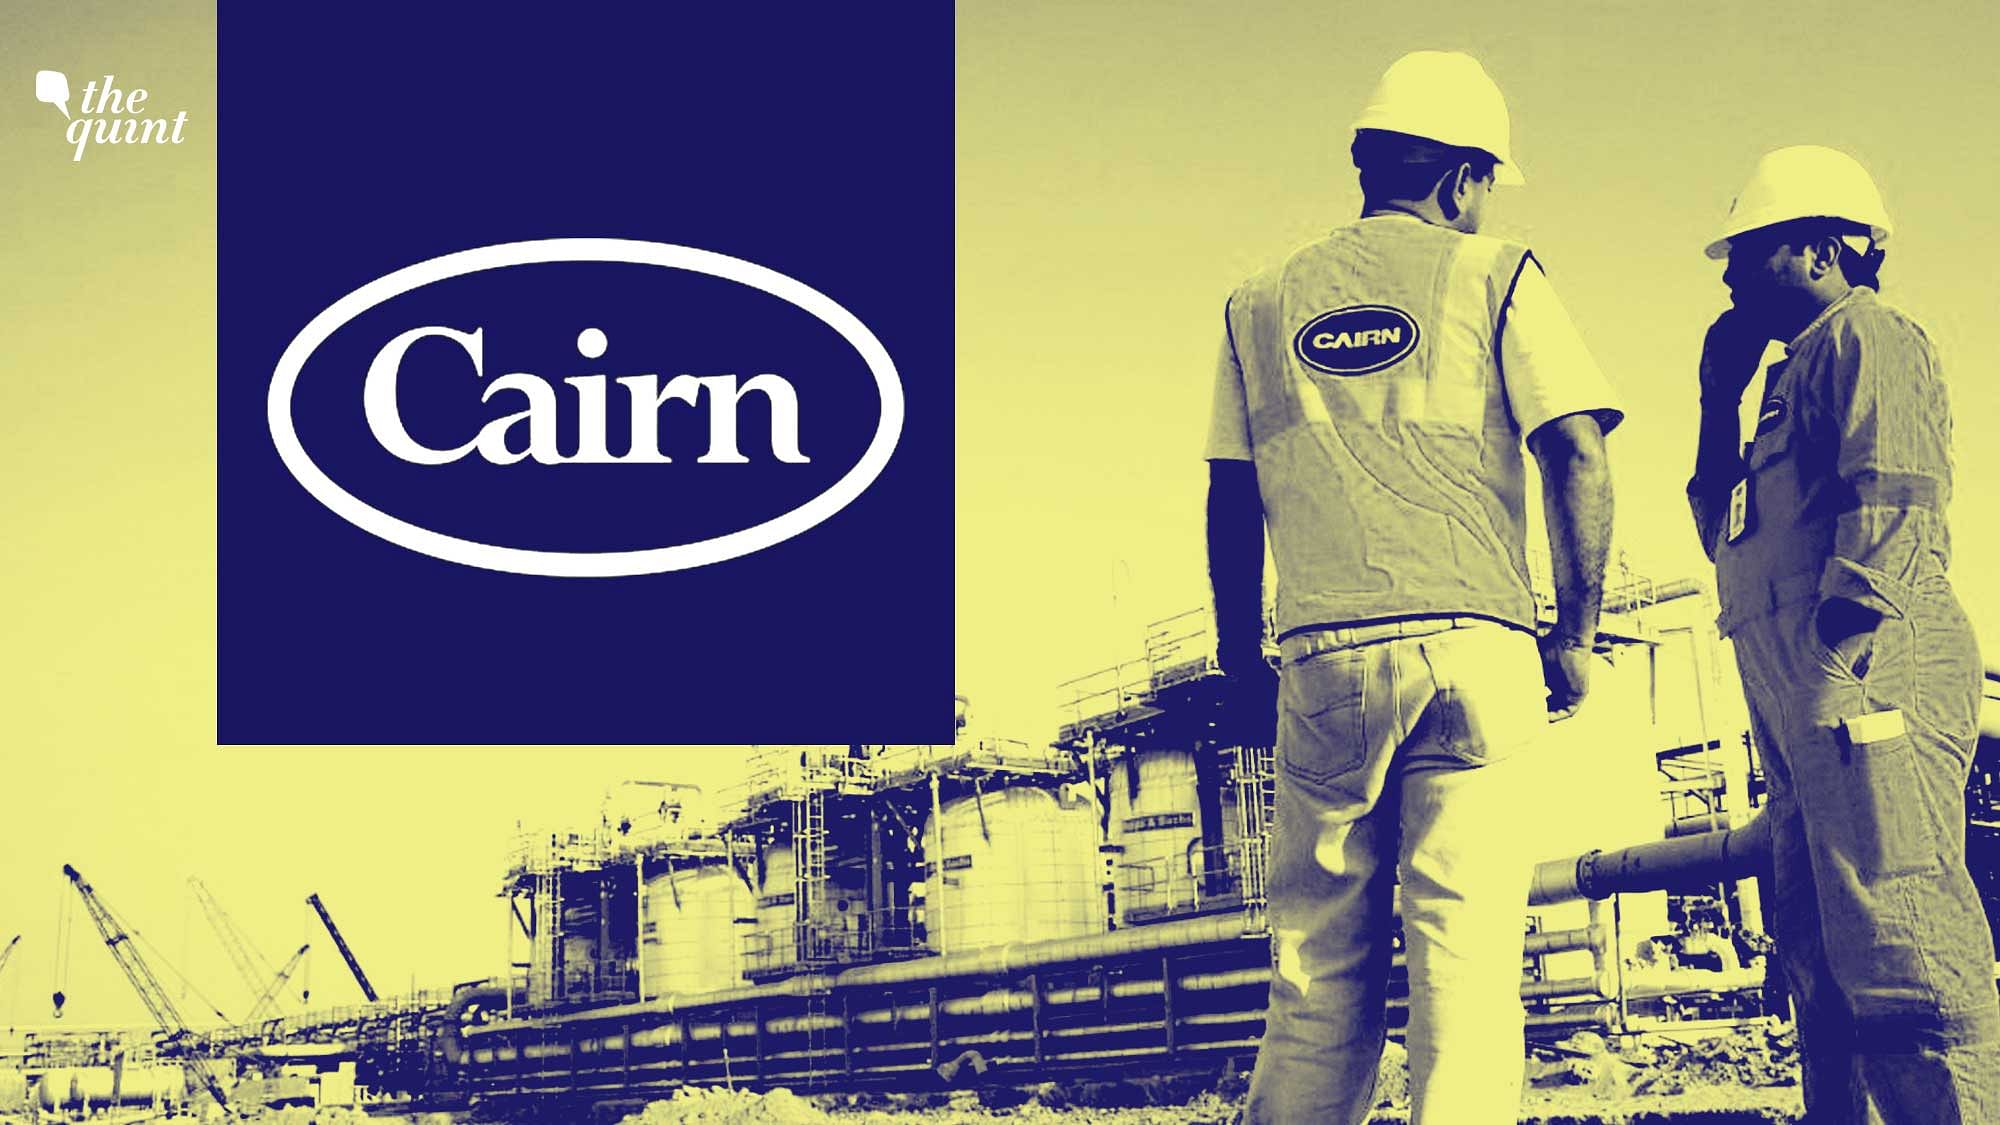 <div class="paragraphs"><p>Investors in the UK oil and gas firm Cairn Energy will be liable for payback of as much as $700 million as a result of the fuel giant's settlement in a<a href="https://www.thequint.com/news/india/indias-dispute-with-cairn-energy-17-billion-arbitration-award-explained#read-more"> long-running tax dispute</a> with the Government of India, Bloomberg reported. Image used for representational purposes.&nbsp;</p></div><div class="paragraphs"><p><br></p></div>